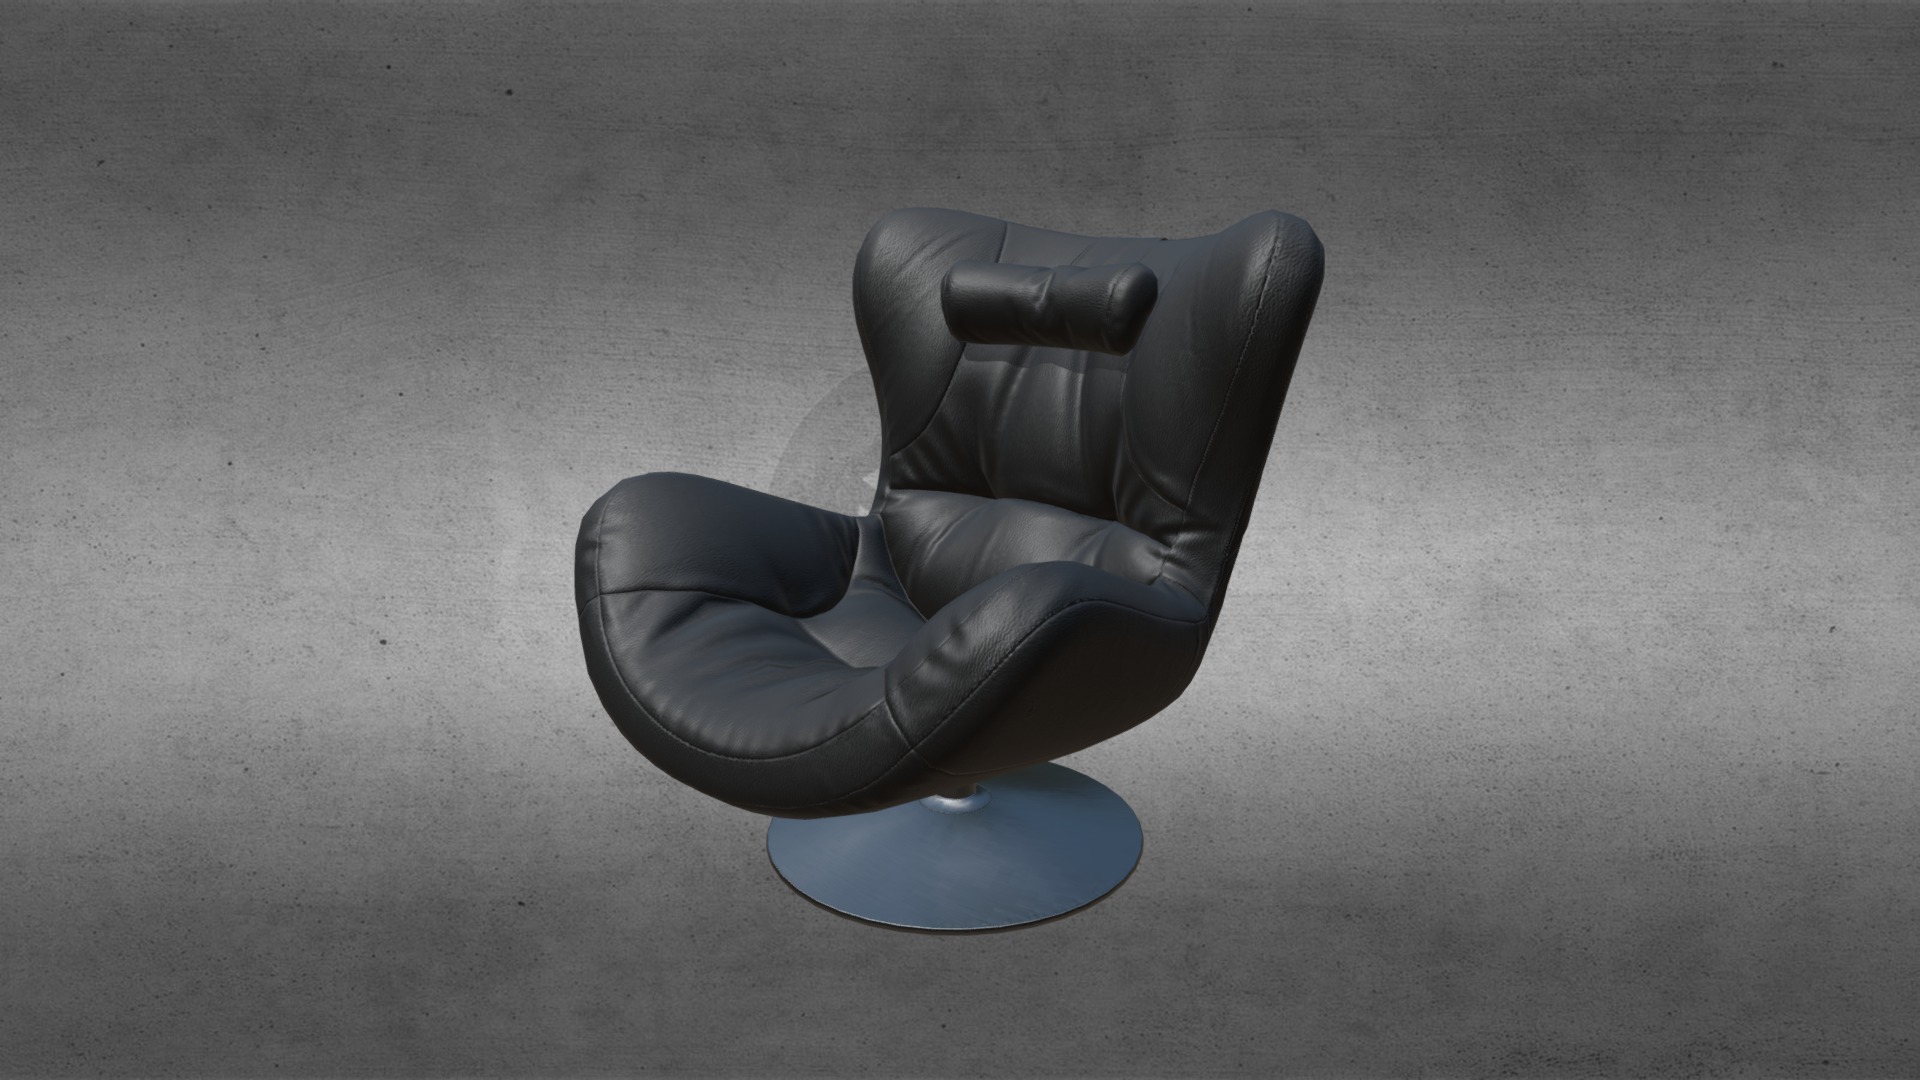 3D model PBR Leather Chair - This is a 3D model of the PBR Leather Chair. The 3D model is about a black leather chair.